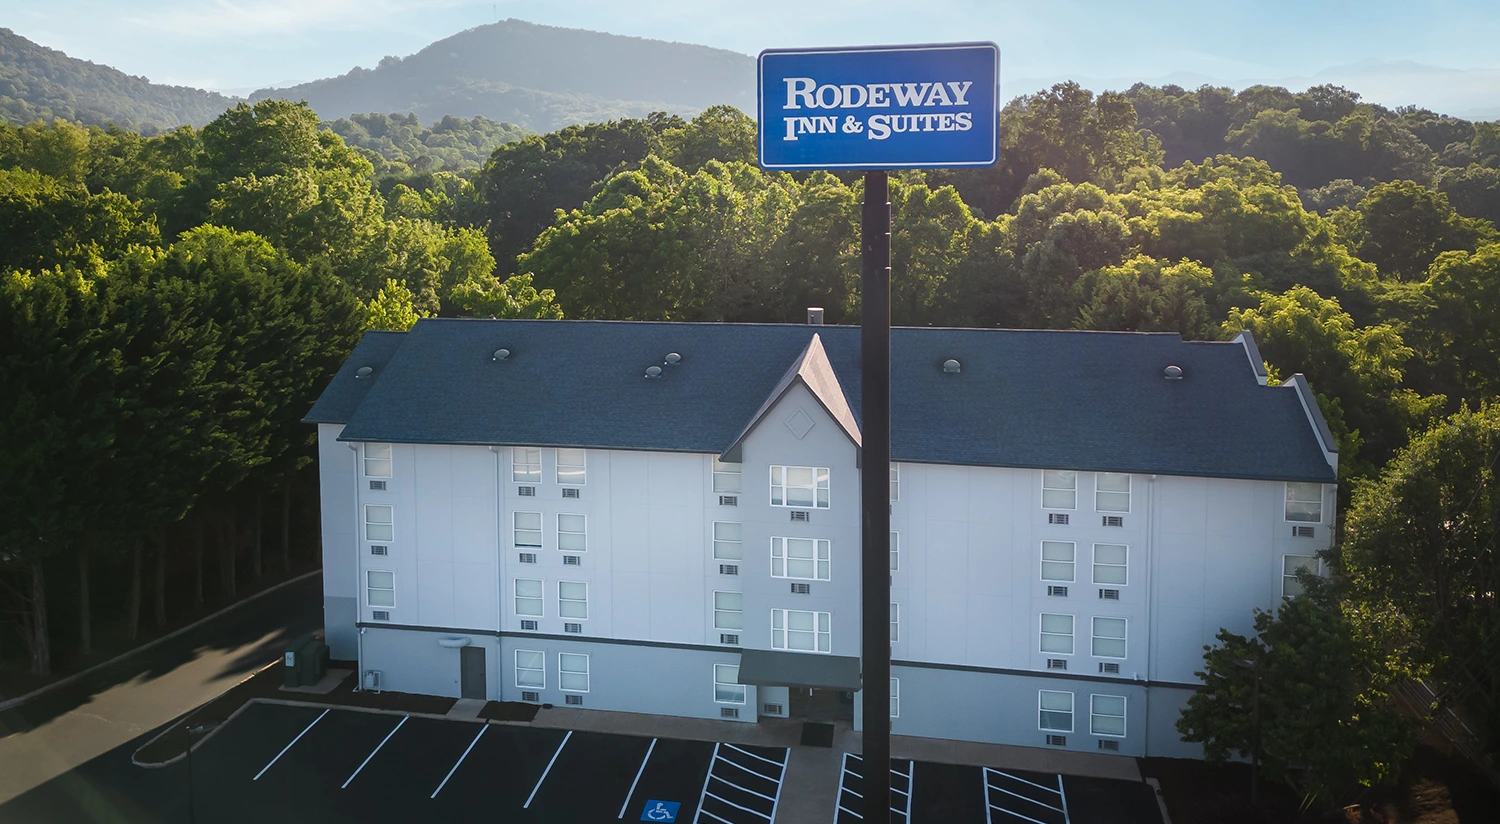 WELCOME TO RODEWAY INN & SUITES IN ASHEVILLE, NC